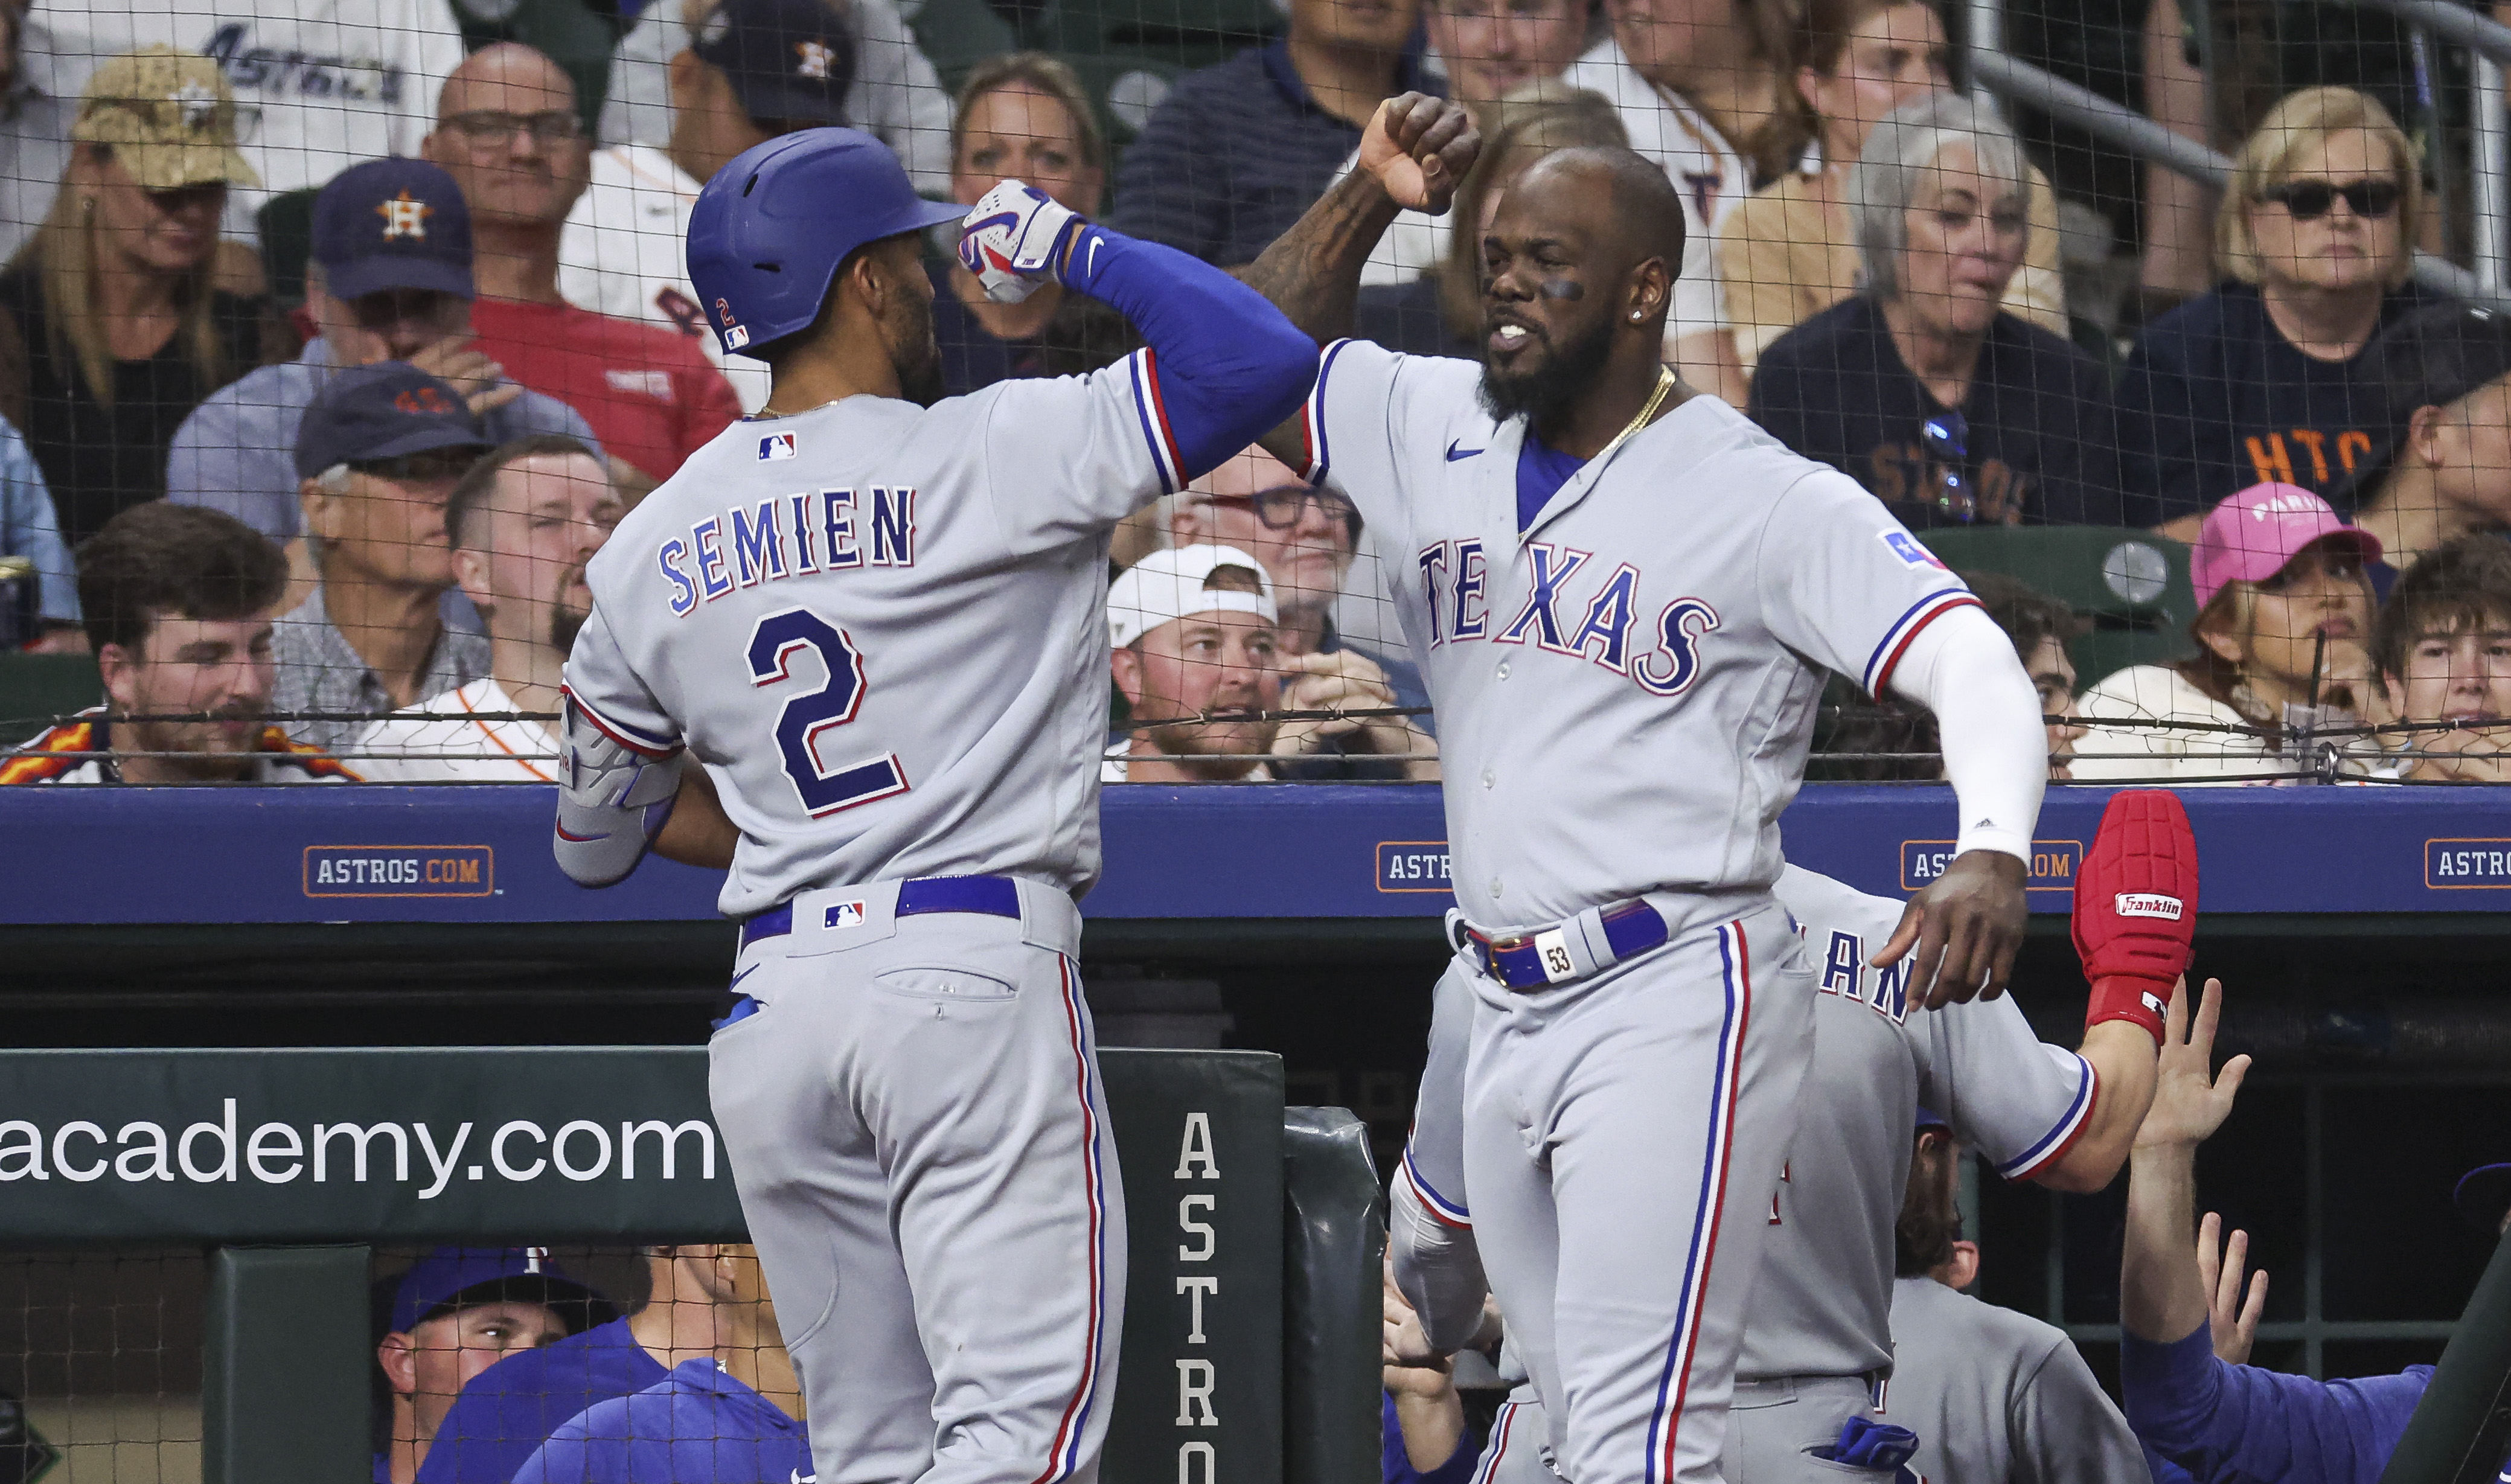 Texas Rangers second baseman Marcus Semien, left, celebrates with right fielder Adolis Garcia after hitting a grand slam in the seventh inning against the Houston Astros on April 16 at Minute Maid Park.